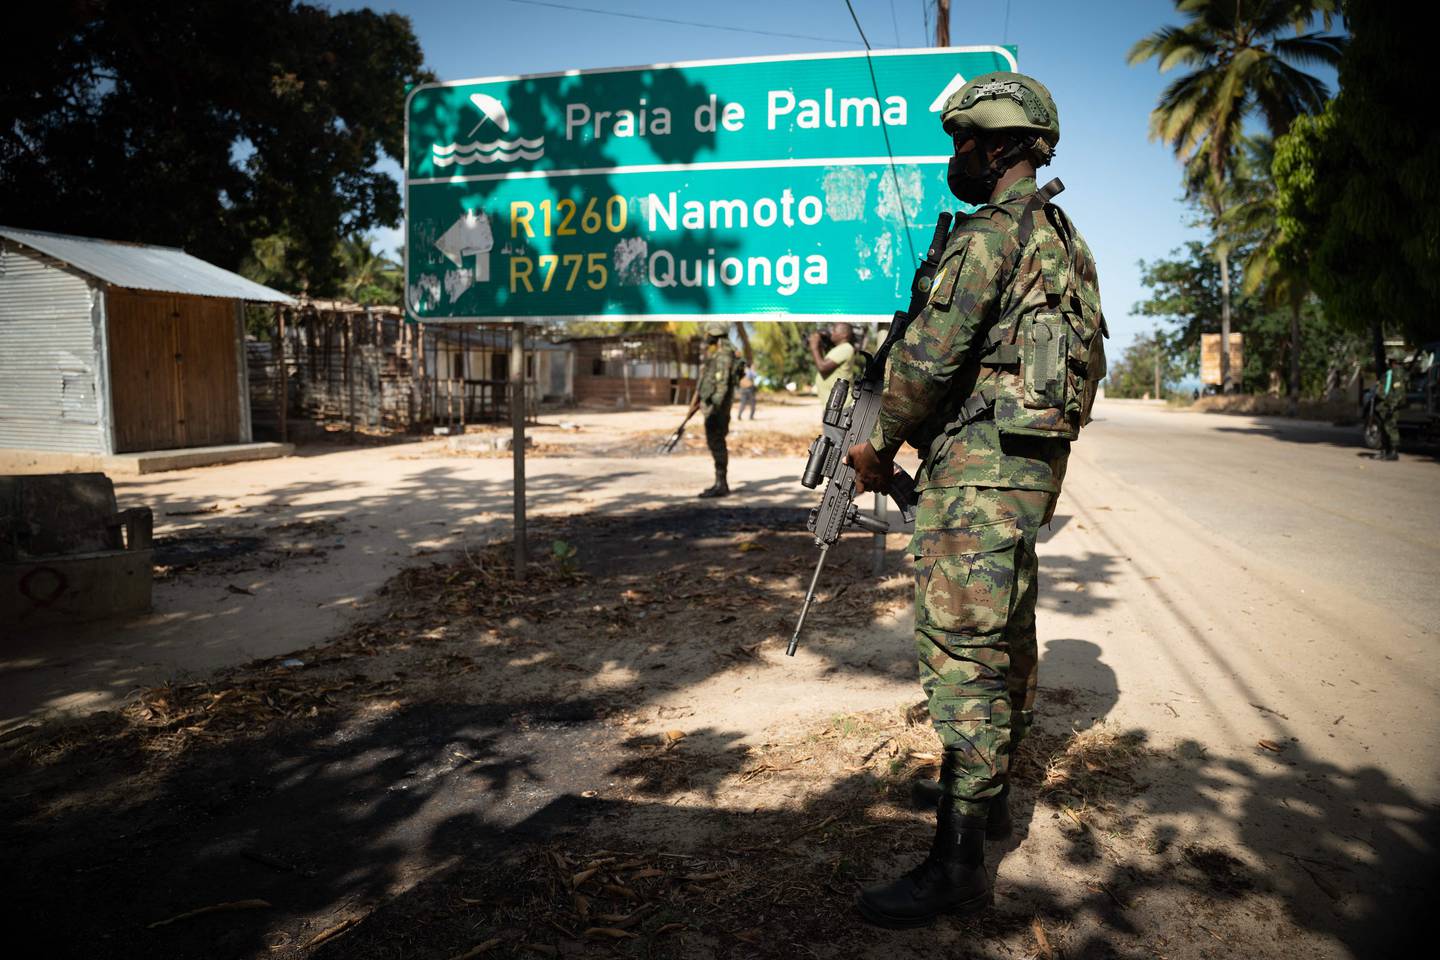 A Rwandan soldier stands guard near Palma, Cabo Delgado in Mozambique, part of a contingent of 1,000 troops and police officers sent to fight ISIS insurgents who were terrorising local towns. AFP